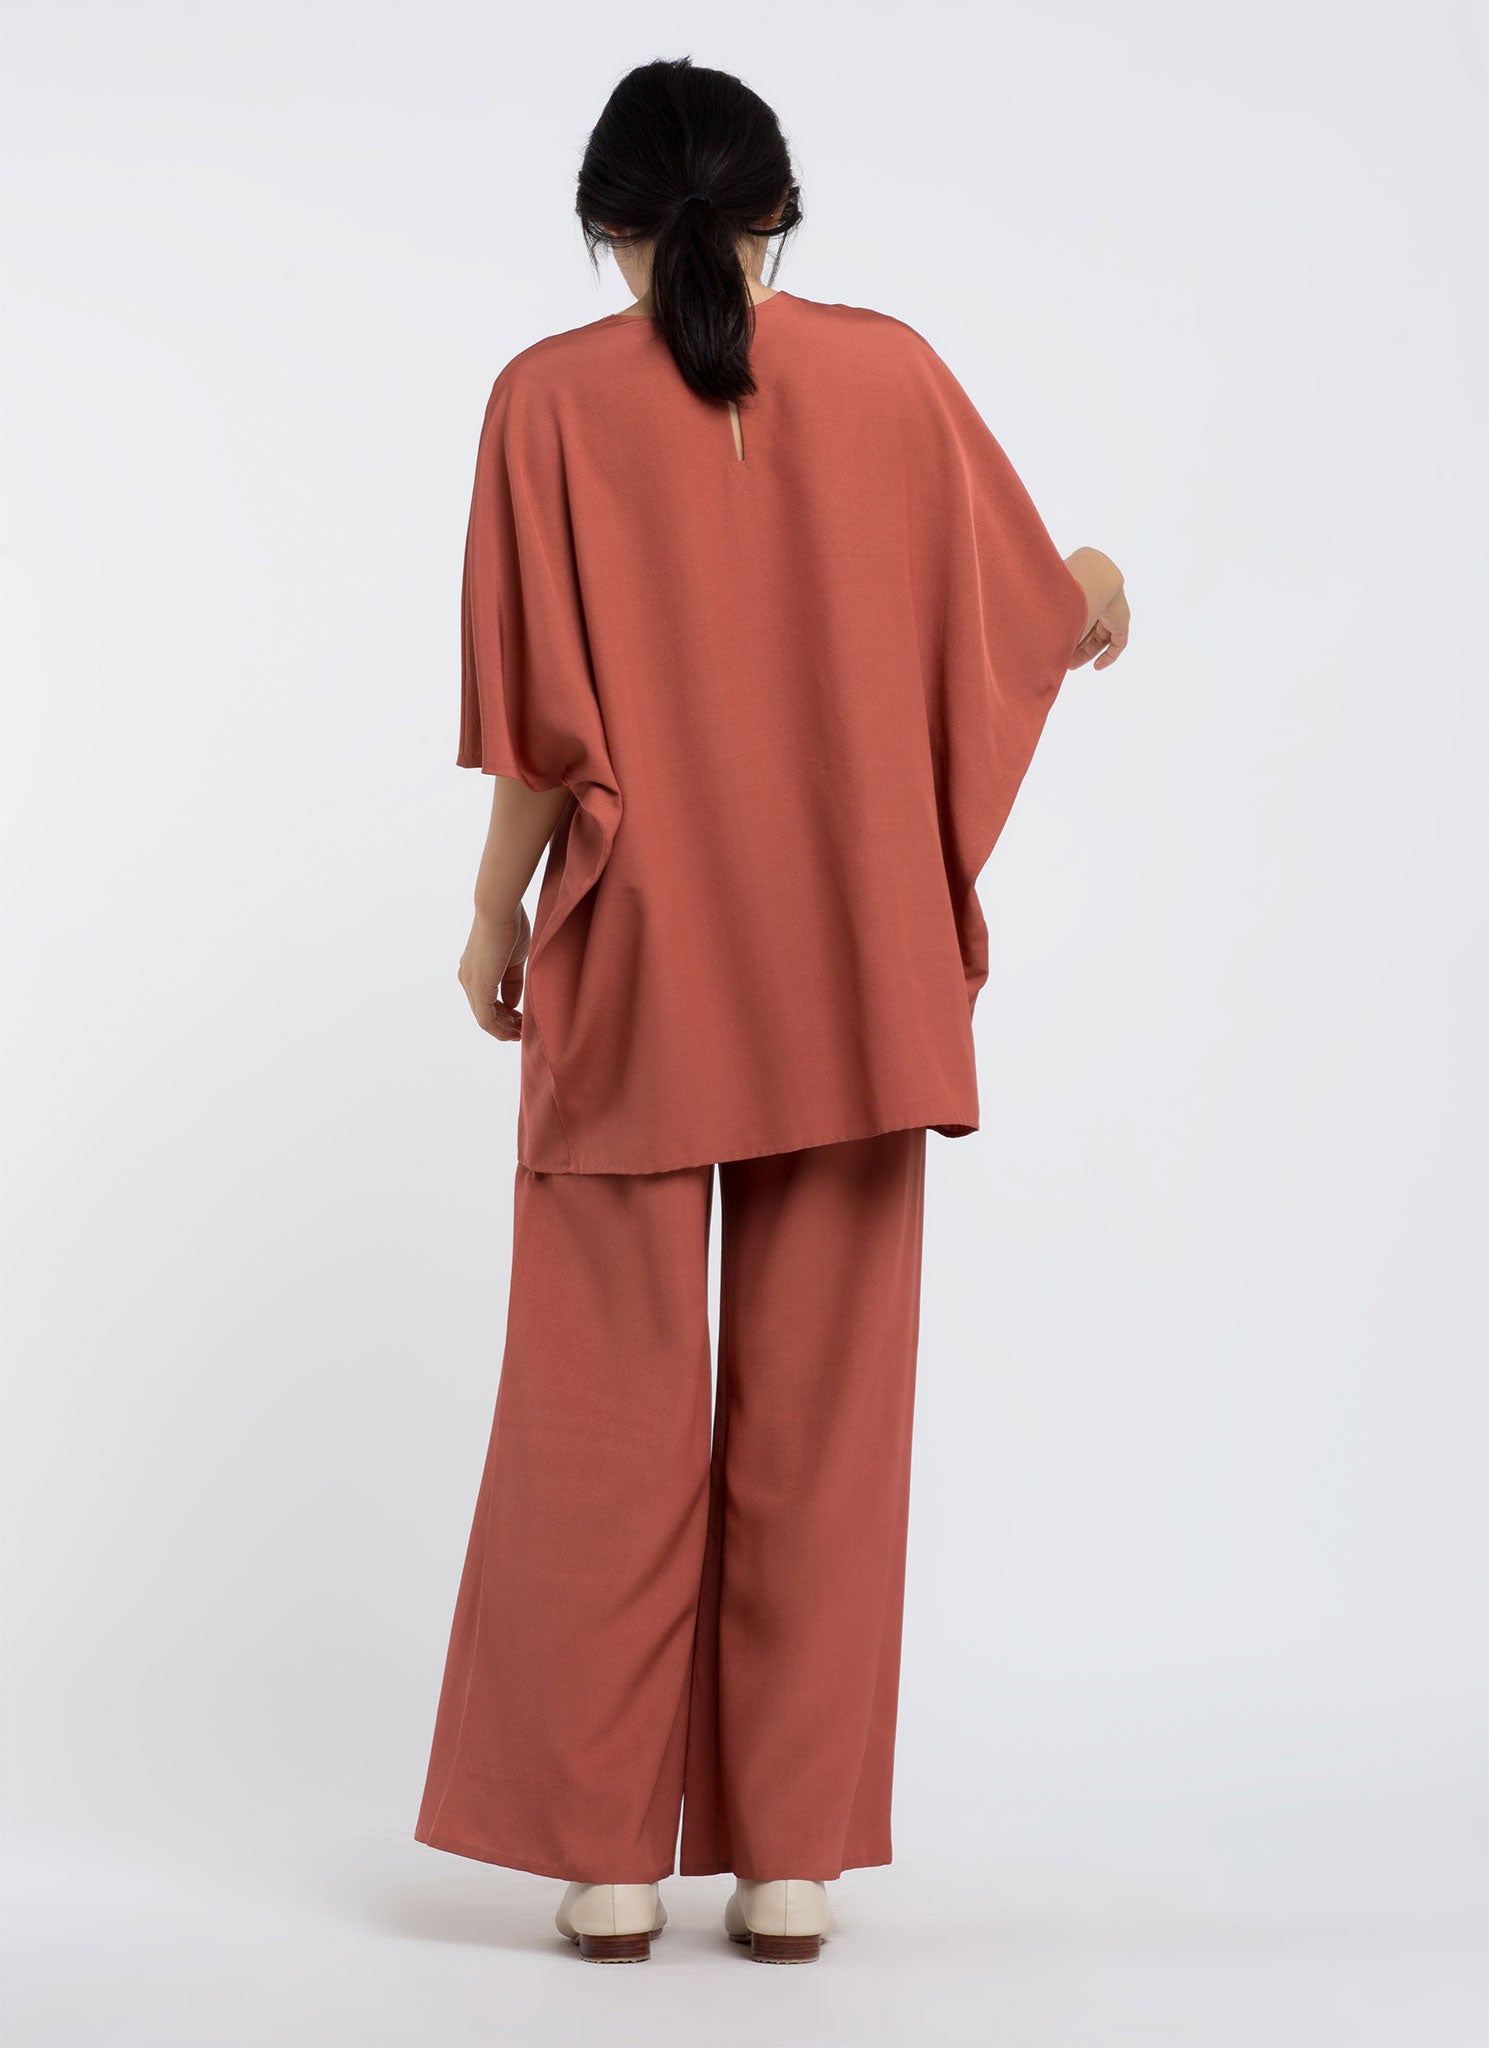 MaxMara Weekend Placido terracotta trousers in pure cotton sateen trousers  with an elasticated waistband